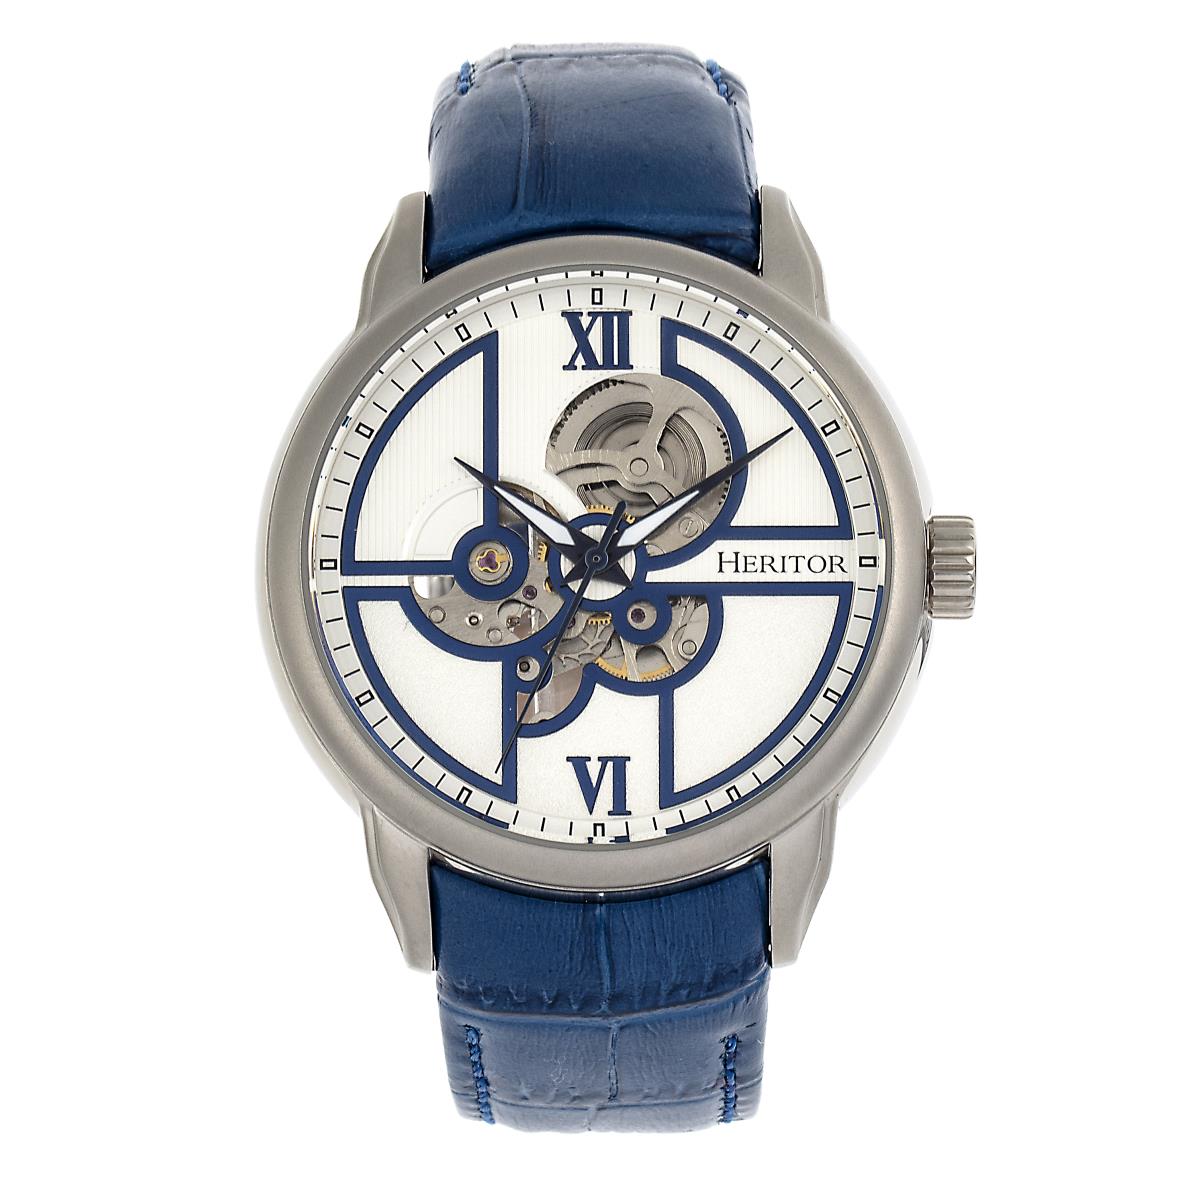 Heritor Automatic Sanford Semi-skeleton Leather-band Watch - Silver/blue